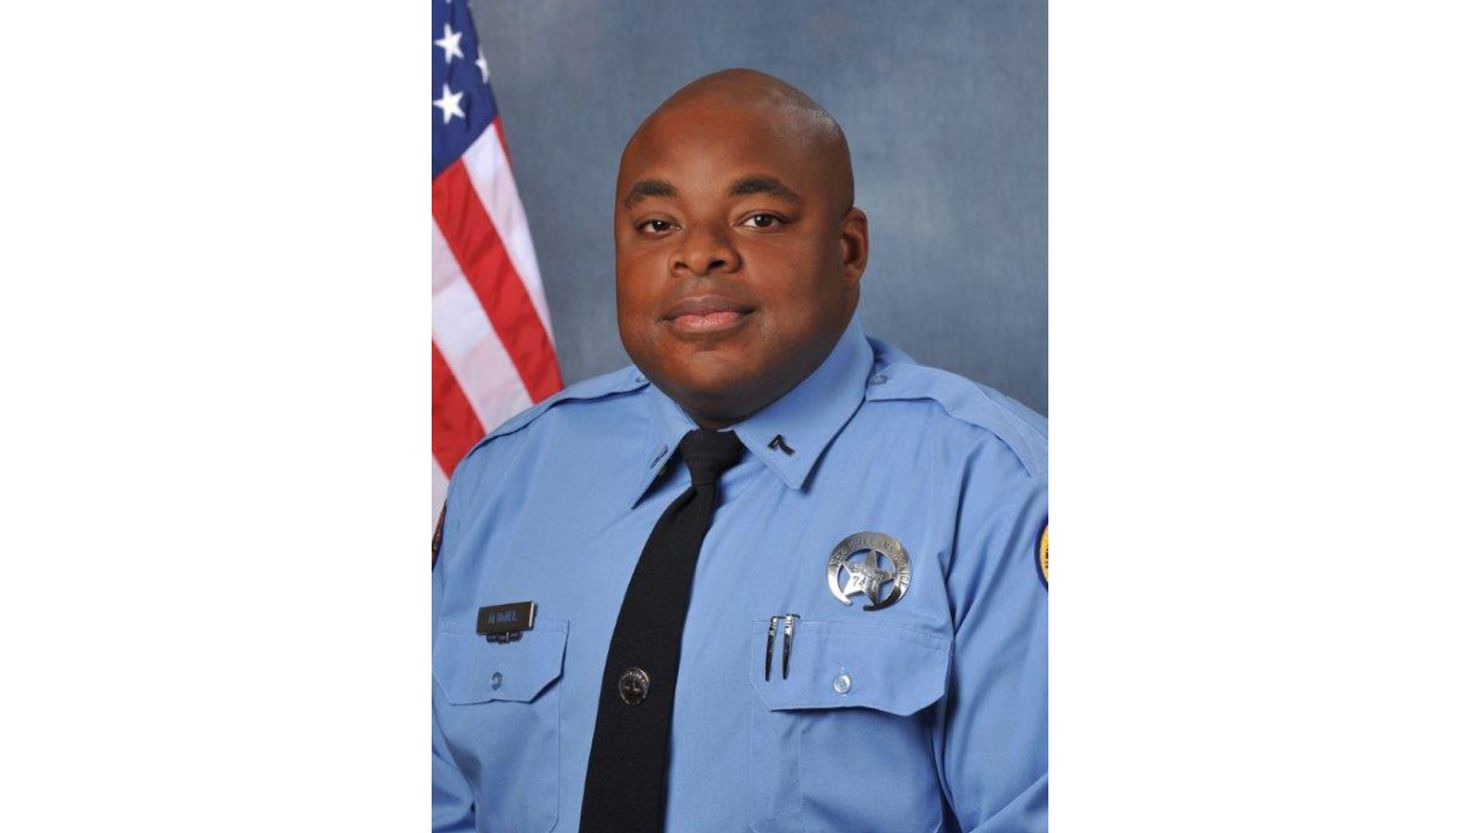 New Orleans Police Officer Marcus McNeil was shot and killed as he and other officers investigated suspicious activity, officials said.